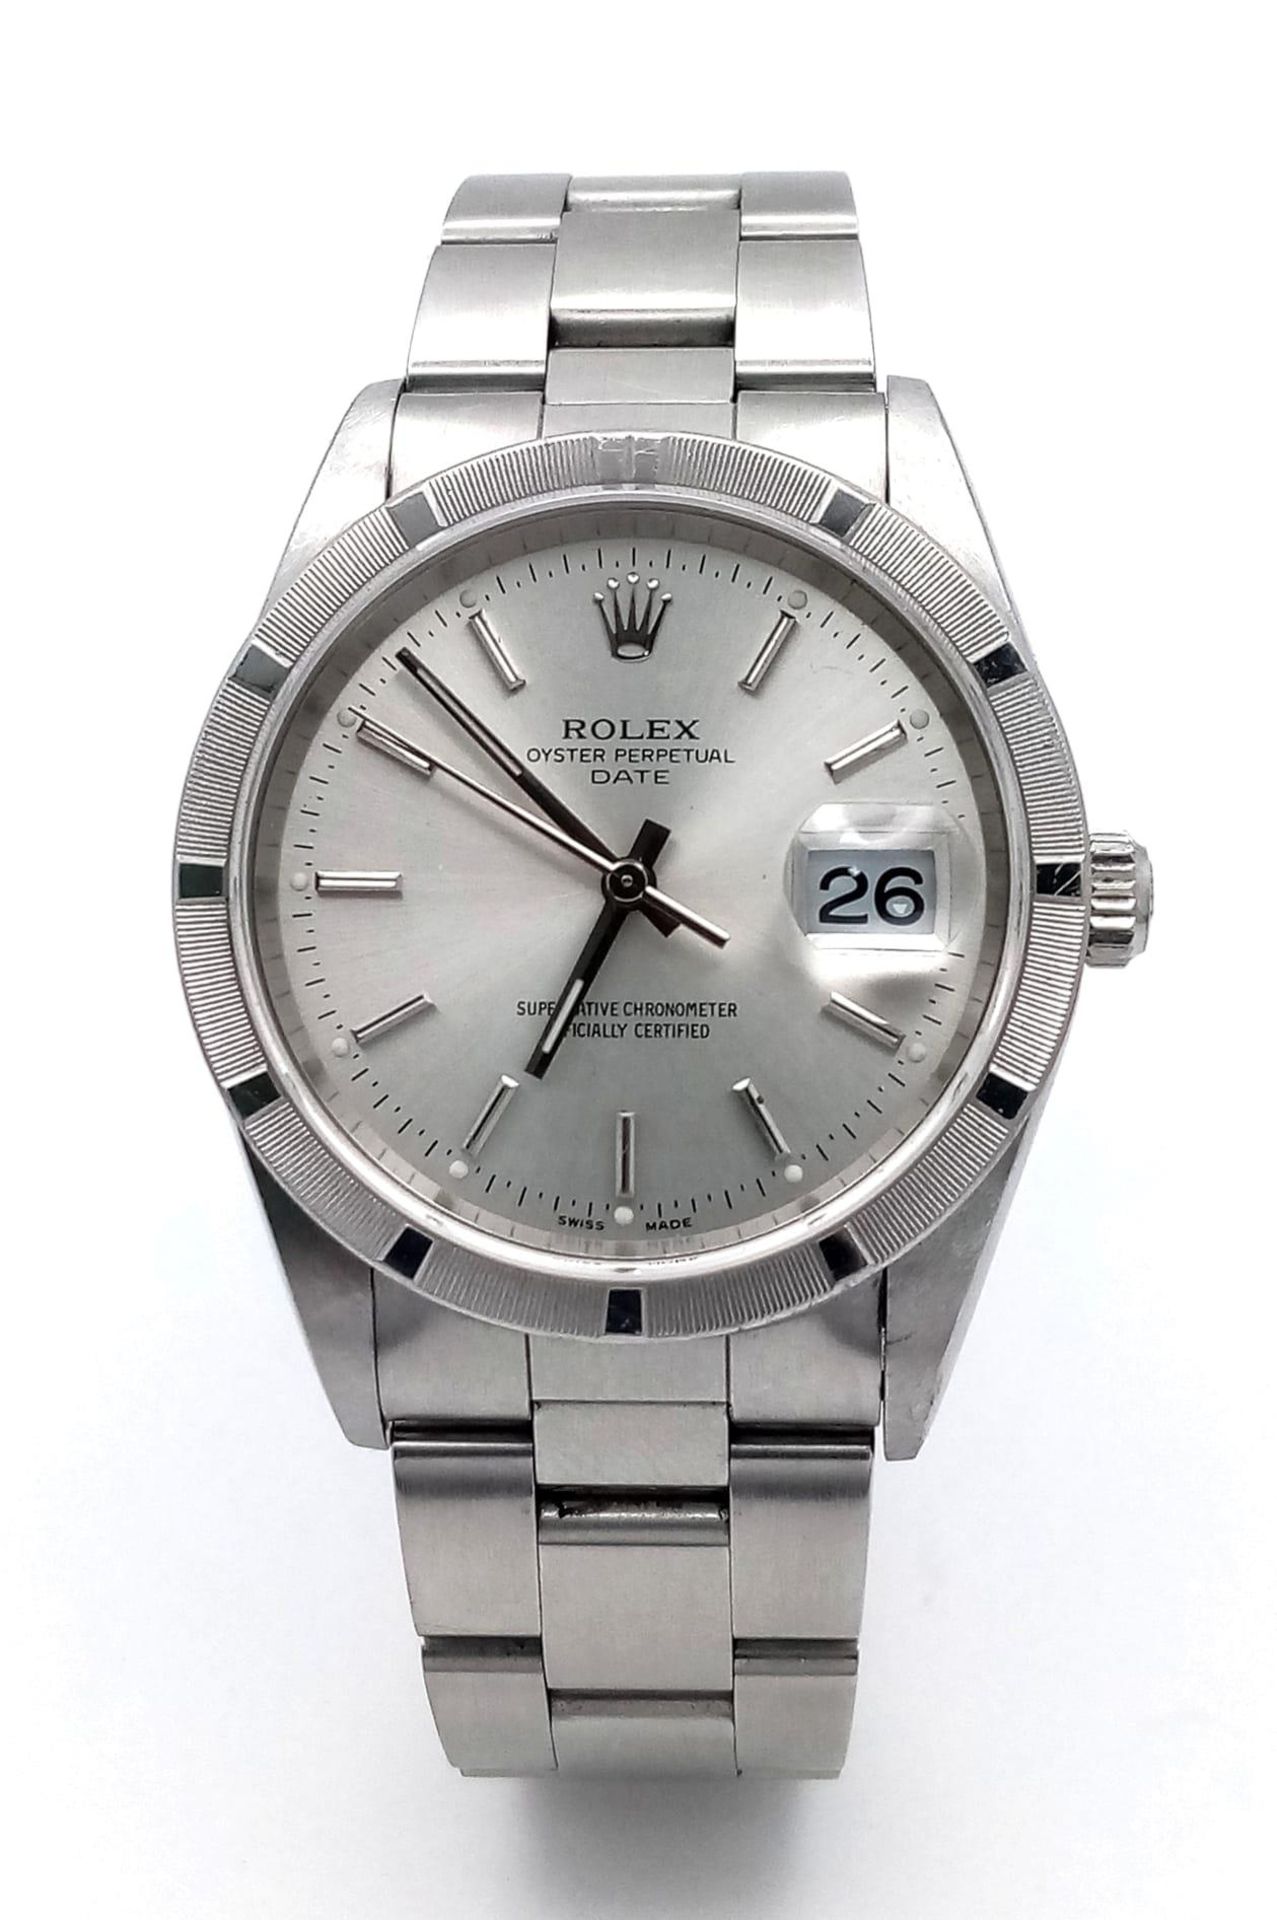 A Rolex Oyster Perpetual Datejust Gents Watch. Stainless steel bracelet and case - 35mm. Silver tone - Image 2 of 8